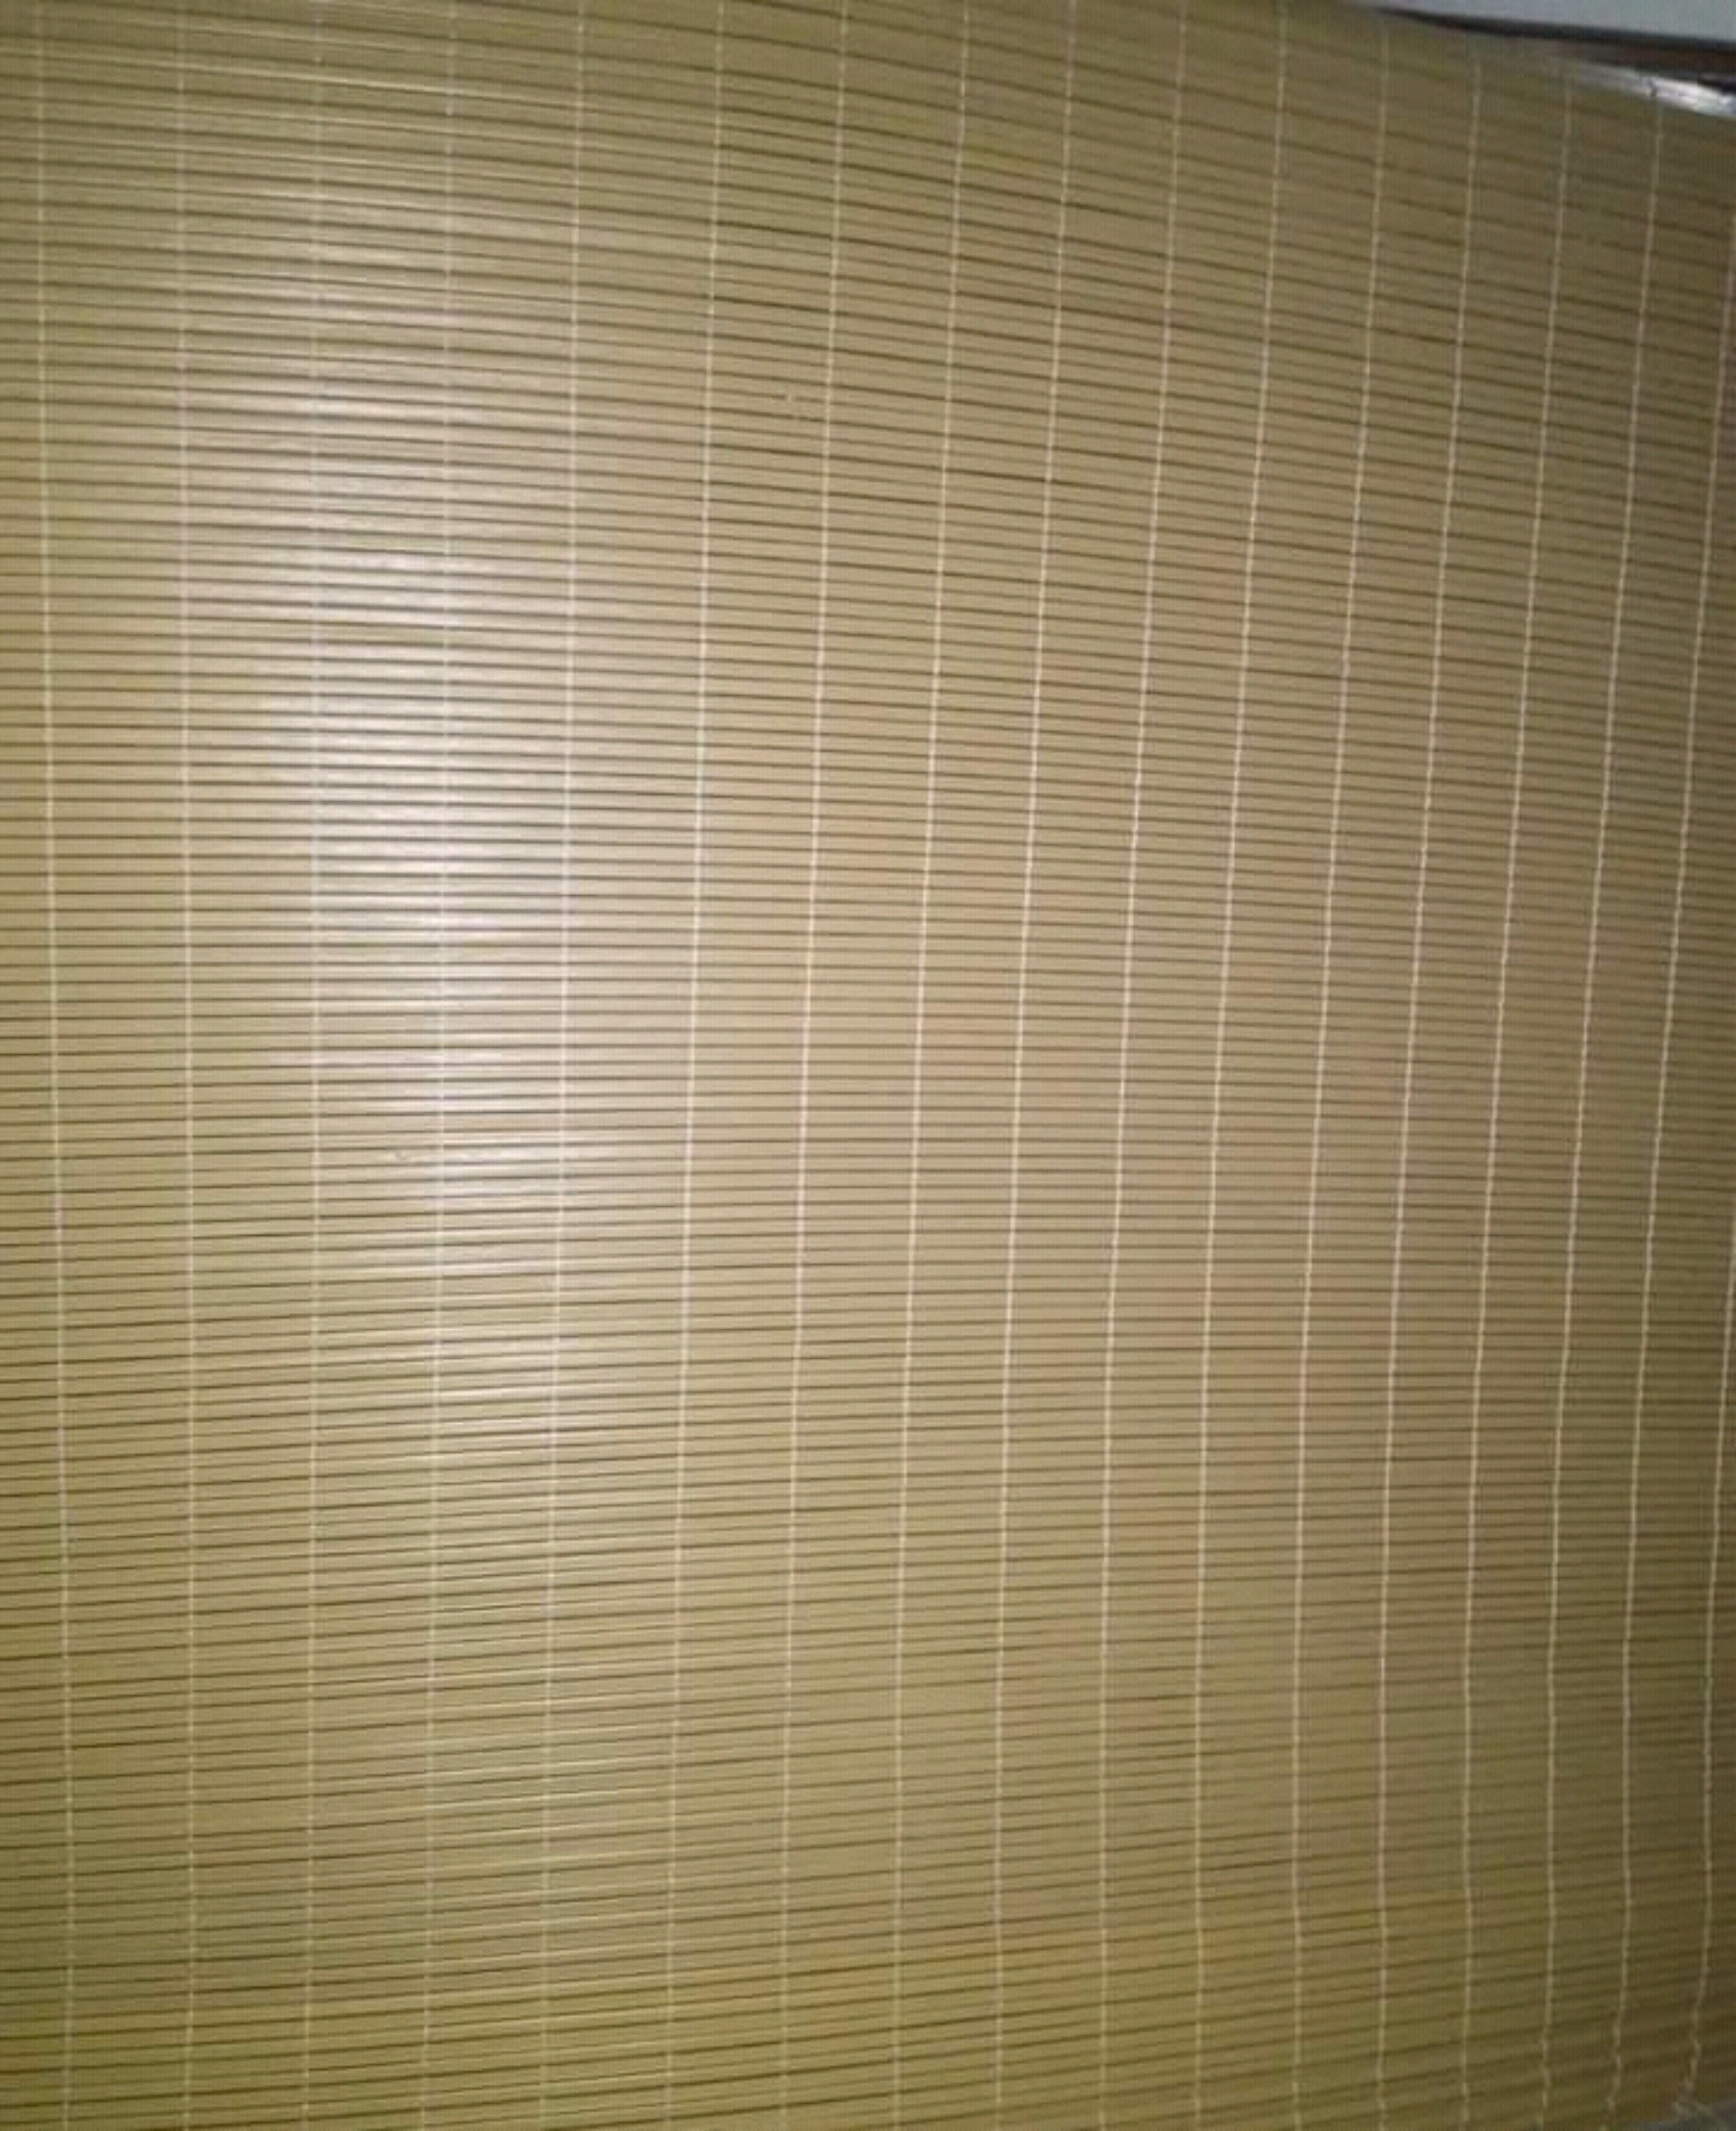 Chinese Blinds